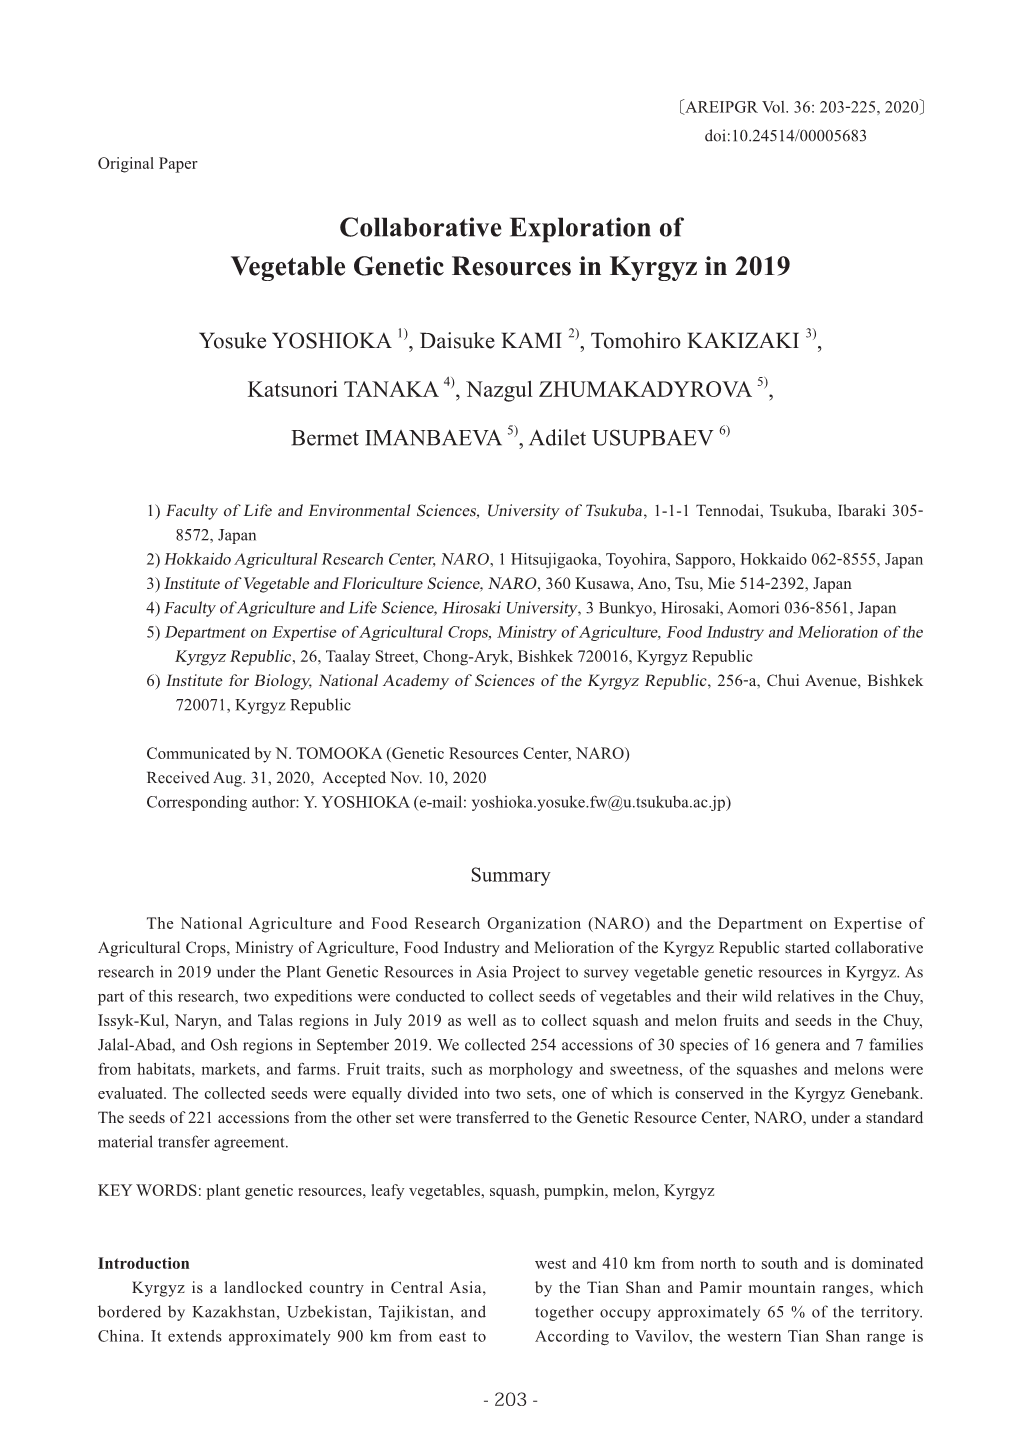 Collaborative Exploration of Vegetable Genetic Resources in Kyrgyz in 2019